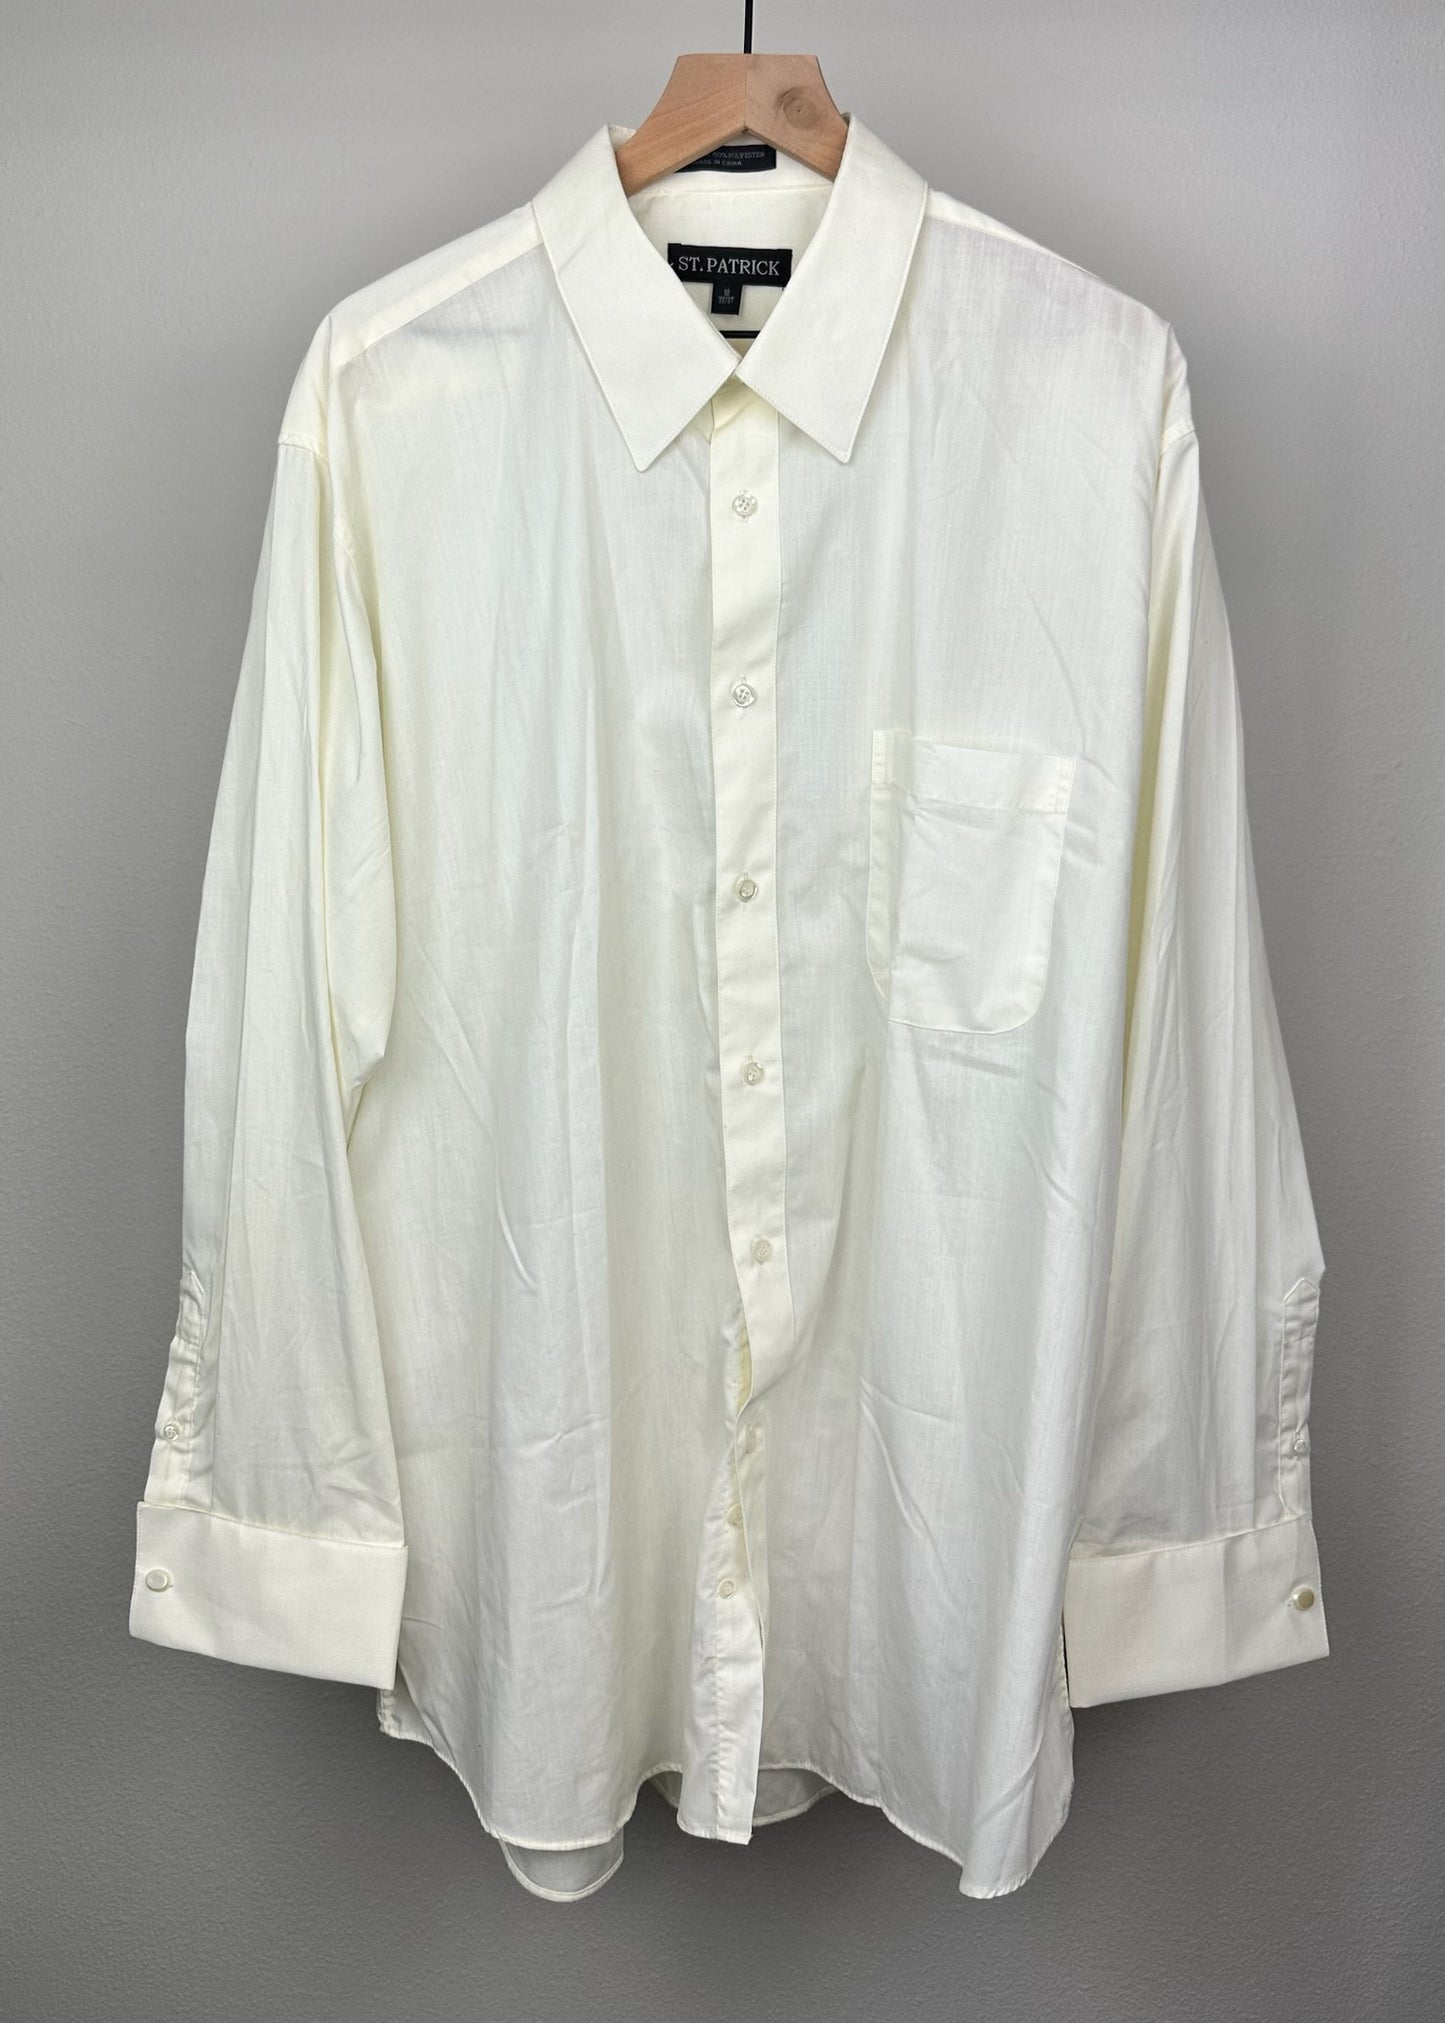 White Button Up By St. Patrick